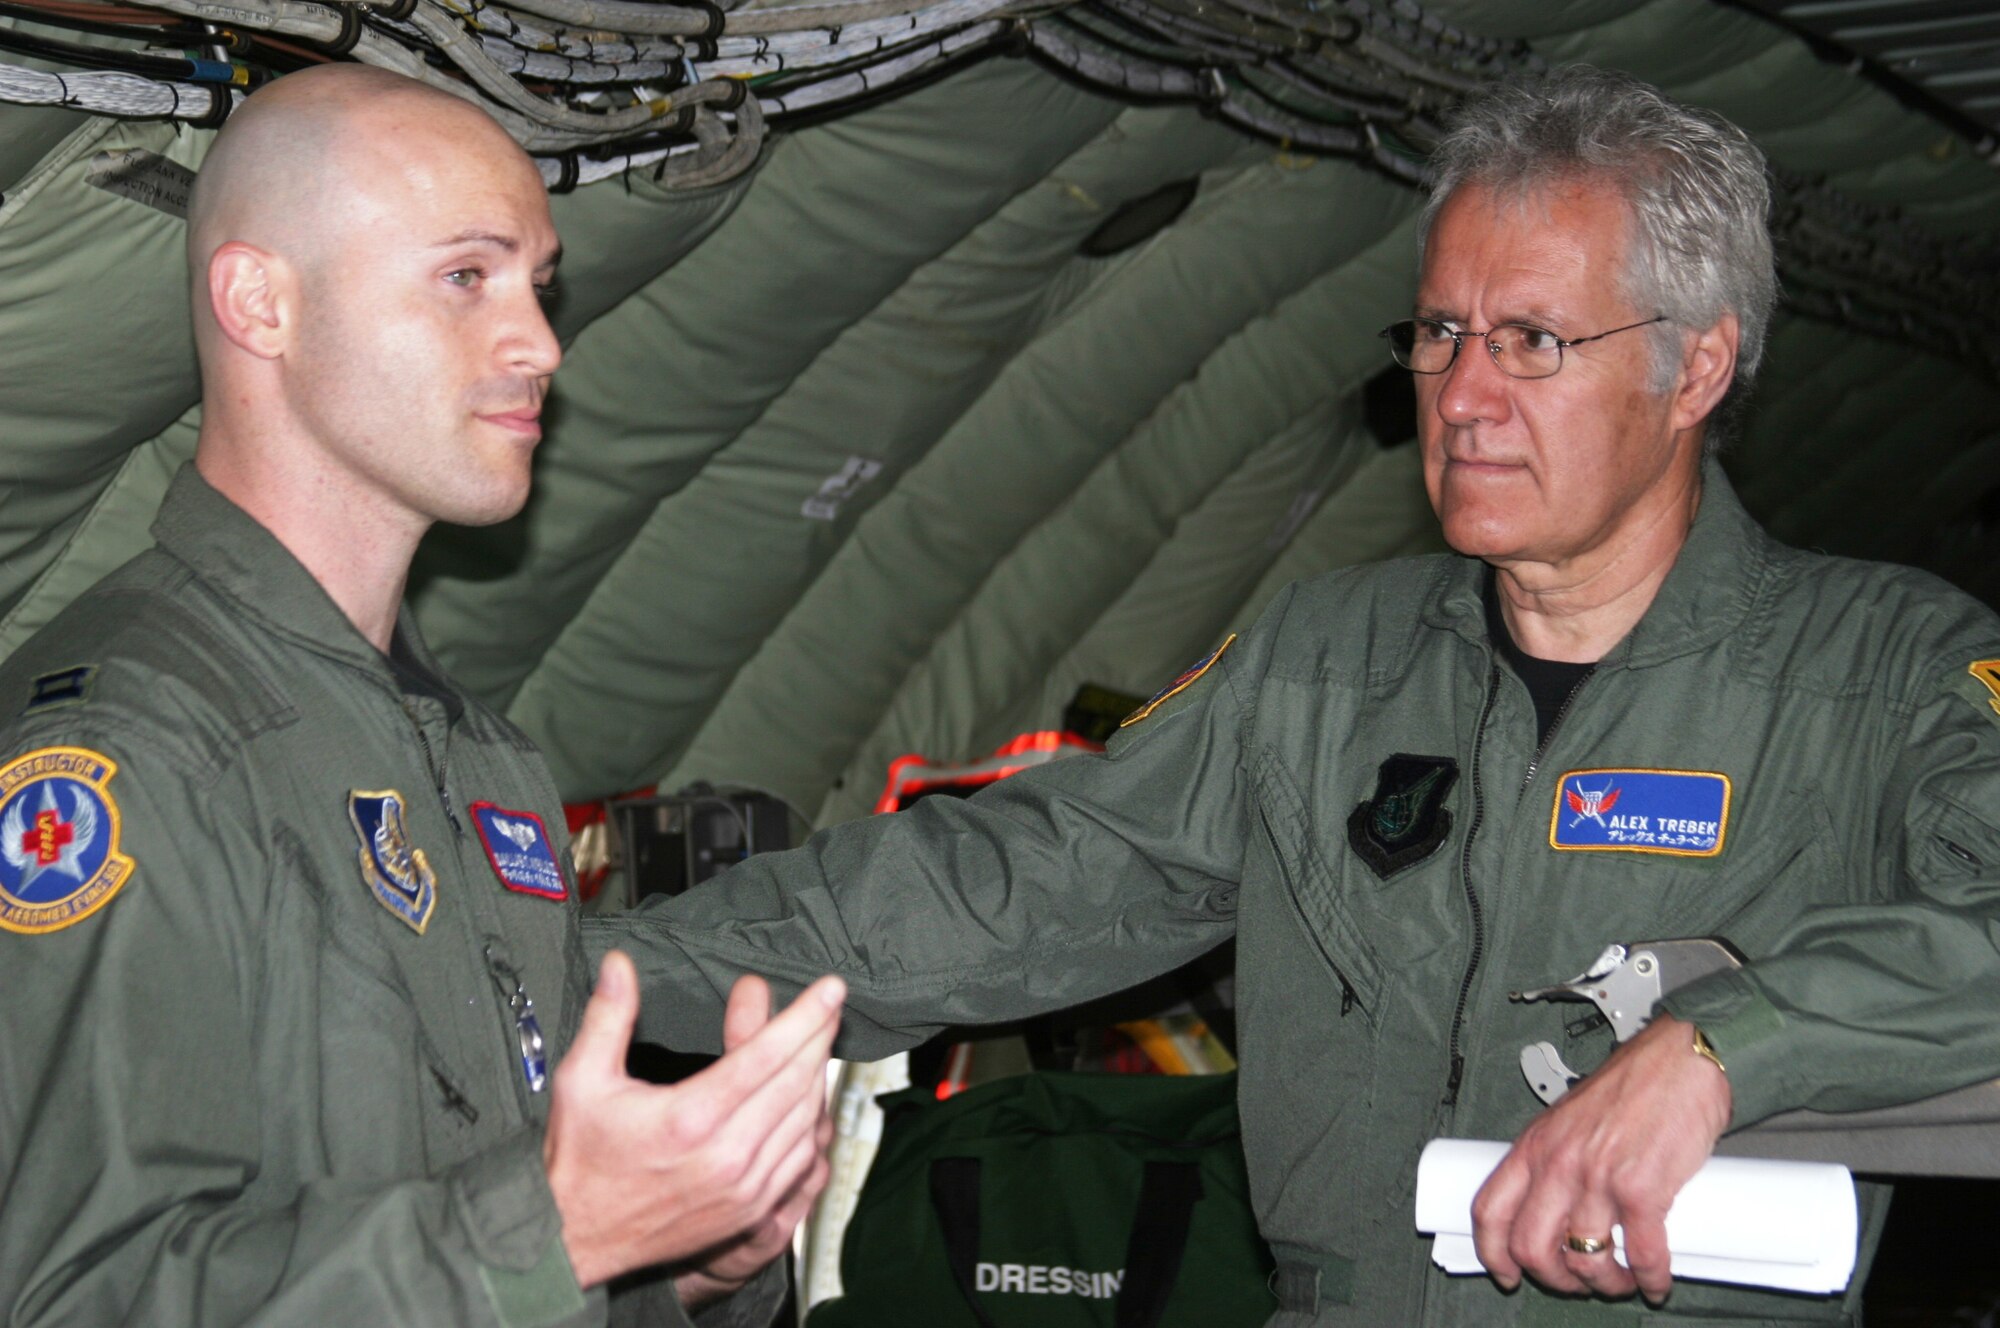 KADENA AIR BASE, Japan -- Alex Trebek, host of the Jeopardy game show, listens as U.S. Air Force Capt. Dallas Weills explains how Kadena's KC-135 aerial refueling aircraft can fly critical-care patients to hospitals in the United States.  Captain Weills is an instructor flight nurse with the 18th Aeromedical Evacuation Squadron.  During a two-day Jeopardy USO tour to Kadena March 30-31, Mr. Trebek and Jeopardy show staff also toured an F-22 stealth fighter, a KC-135 stratotanker, an E-3 AWACS (Airborne Warning and Control System), an F-15C fighter, and an HH-60 helicopter.  The F-22 is temporarily based at Kadena on its first overseas deployment from Langley Air Force Base, Va.  Kadena residents were allowed to try-out to be contestants on Jeopardy, as well.  (Air Force/Senior Airman Nestor Cruz)